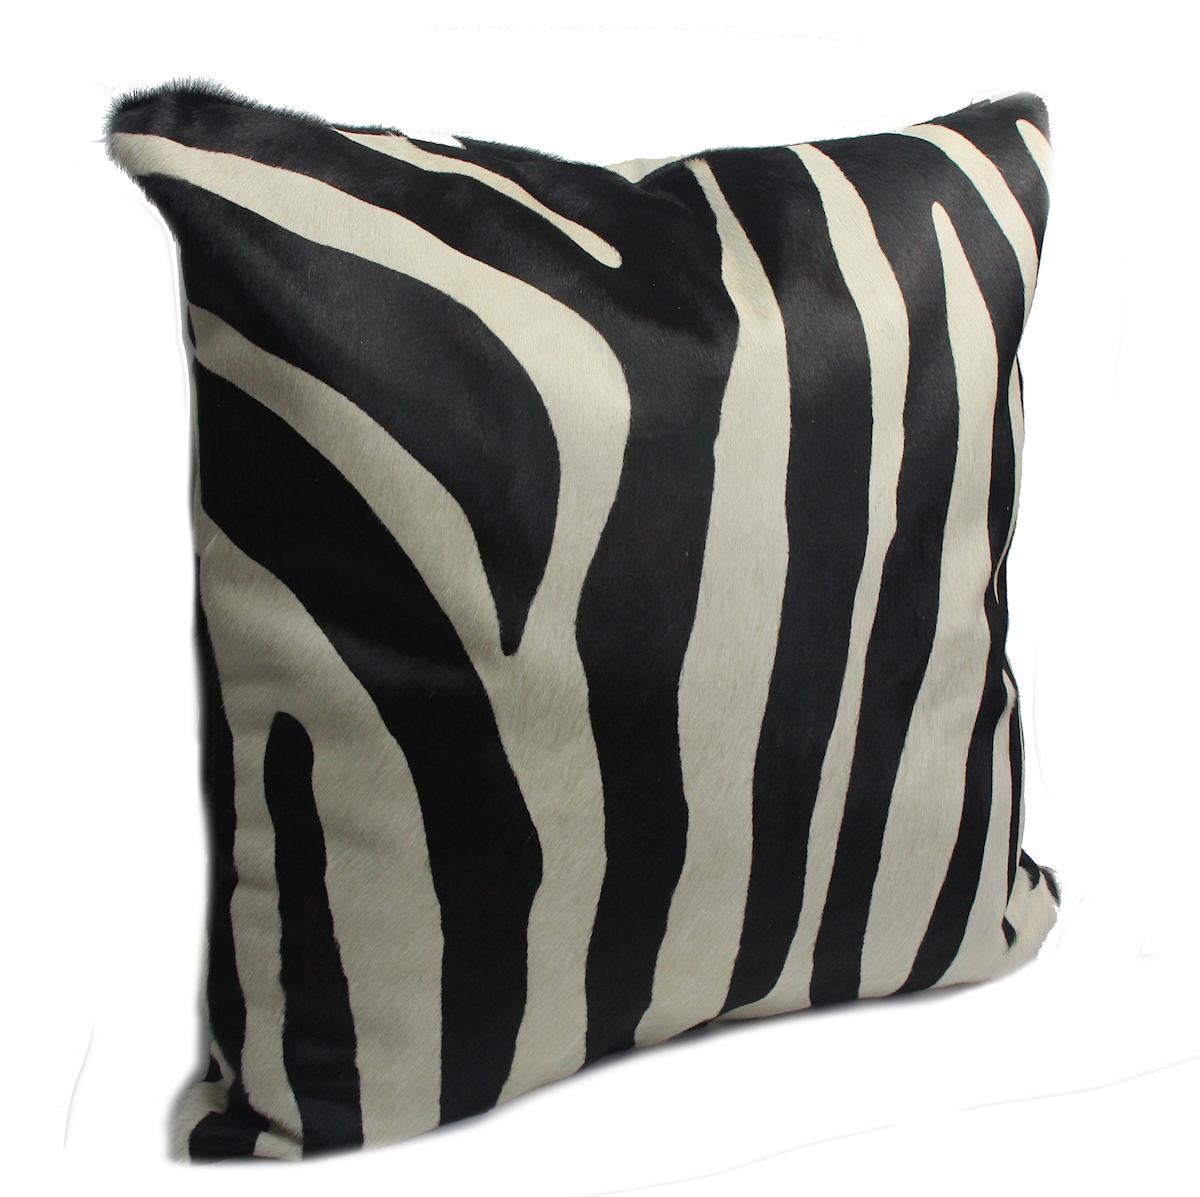 Add touches of exotic flare to your interiors with this large zebra print pillow cover. Australian Designer and Artisan, Emily Barbara personally pre-selects and pre-patterns her zebra print cowhide skins so that she may capture the striking pattern